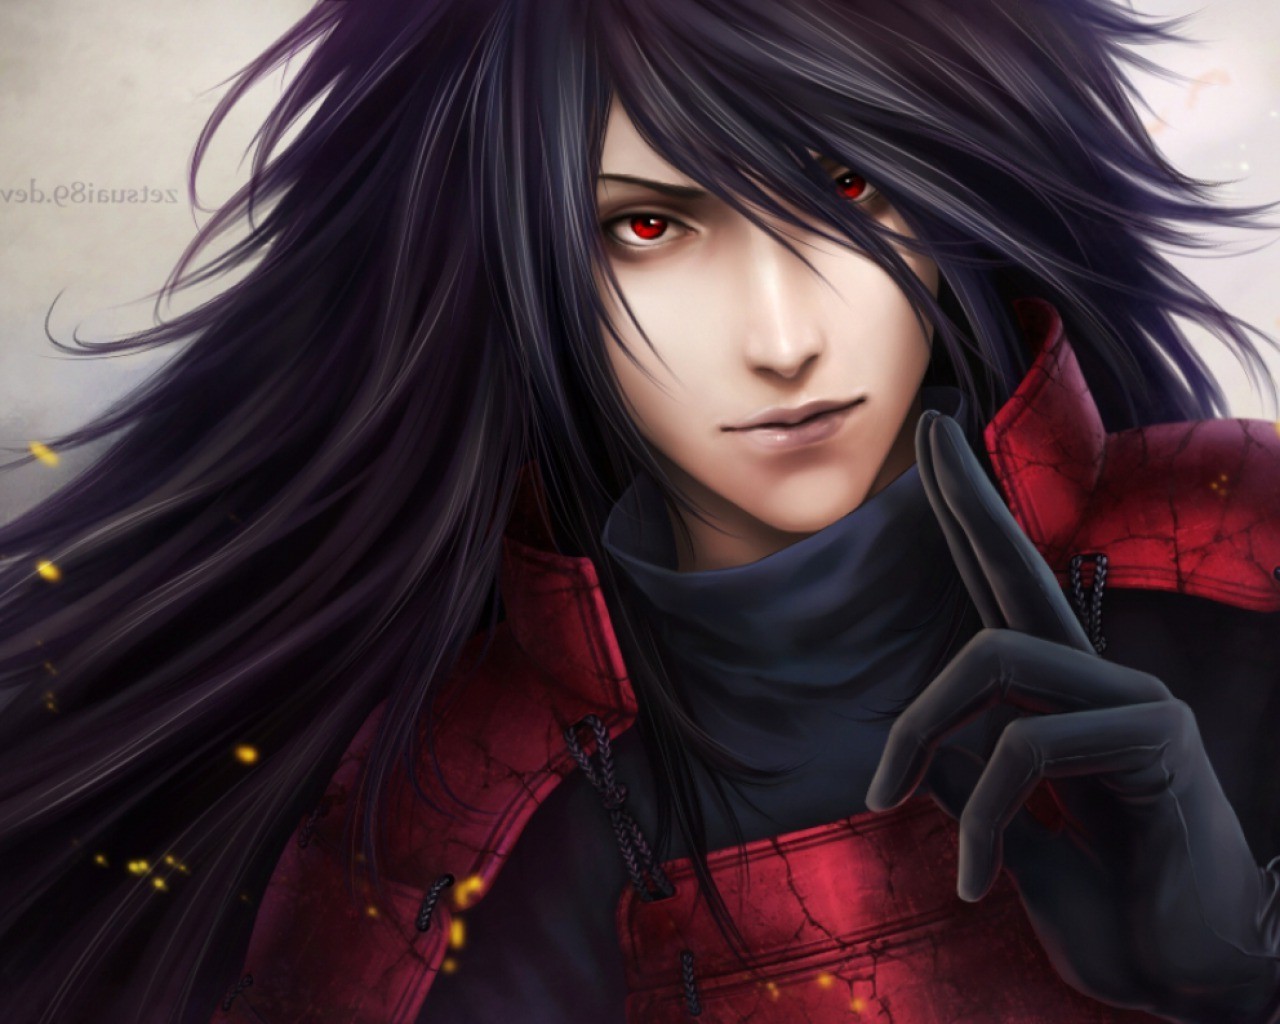 uchiha madara anime boys long hair red eyes wallpapers hd desktop and mobile backgrounds uchiha madara anime boys long hair